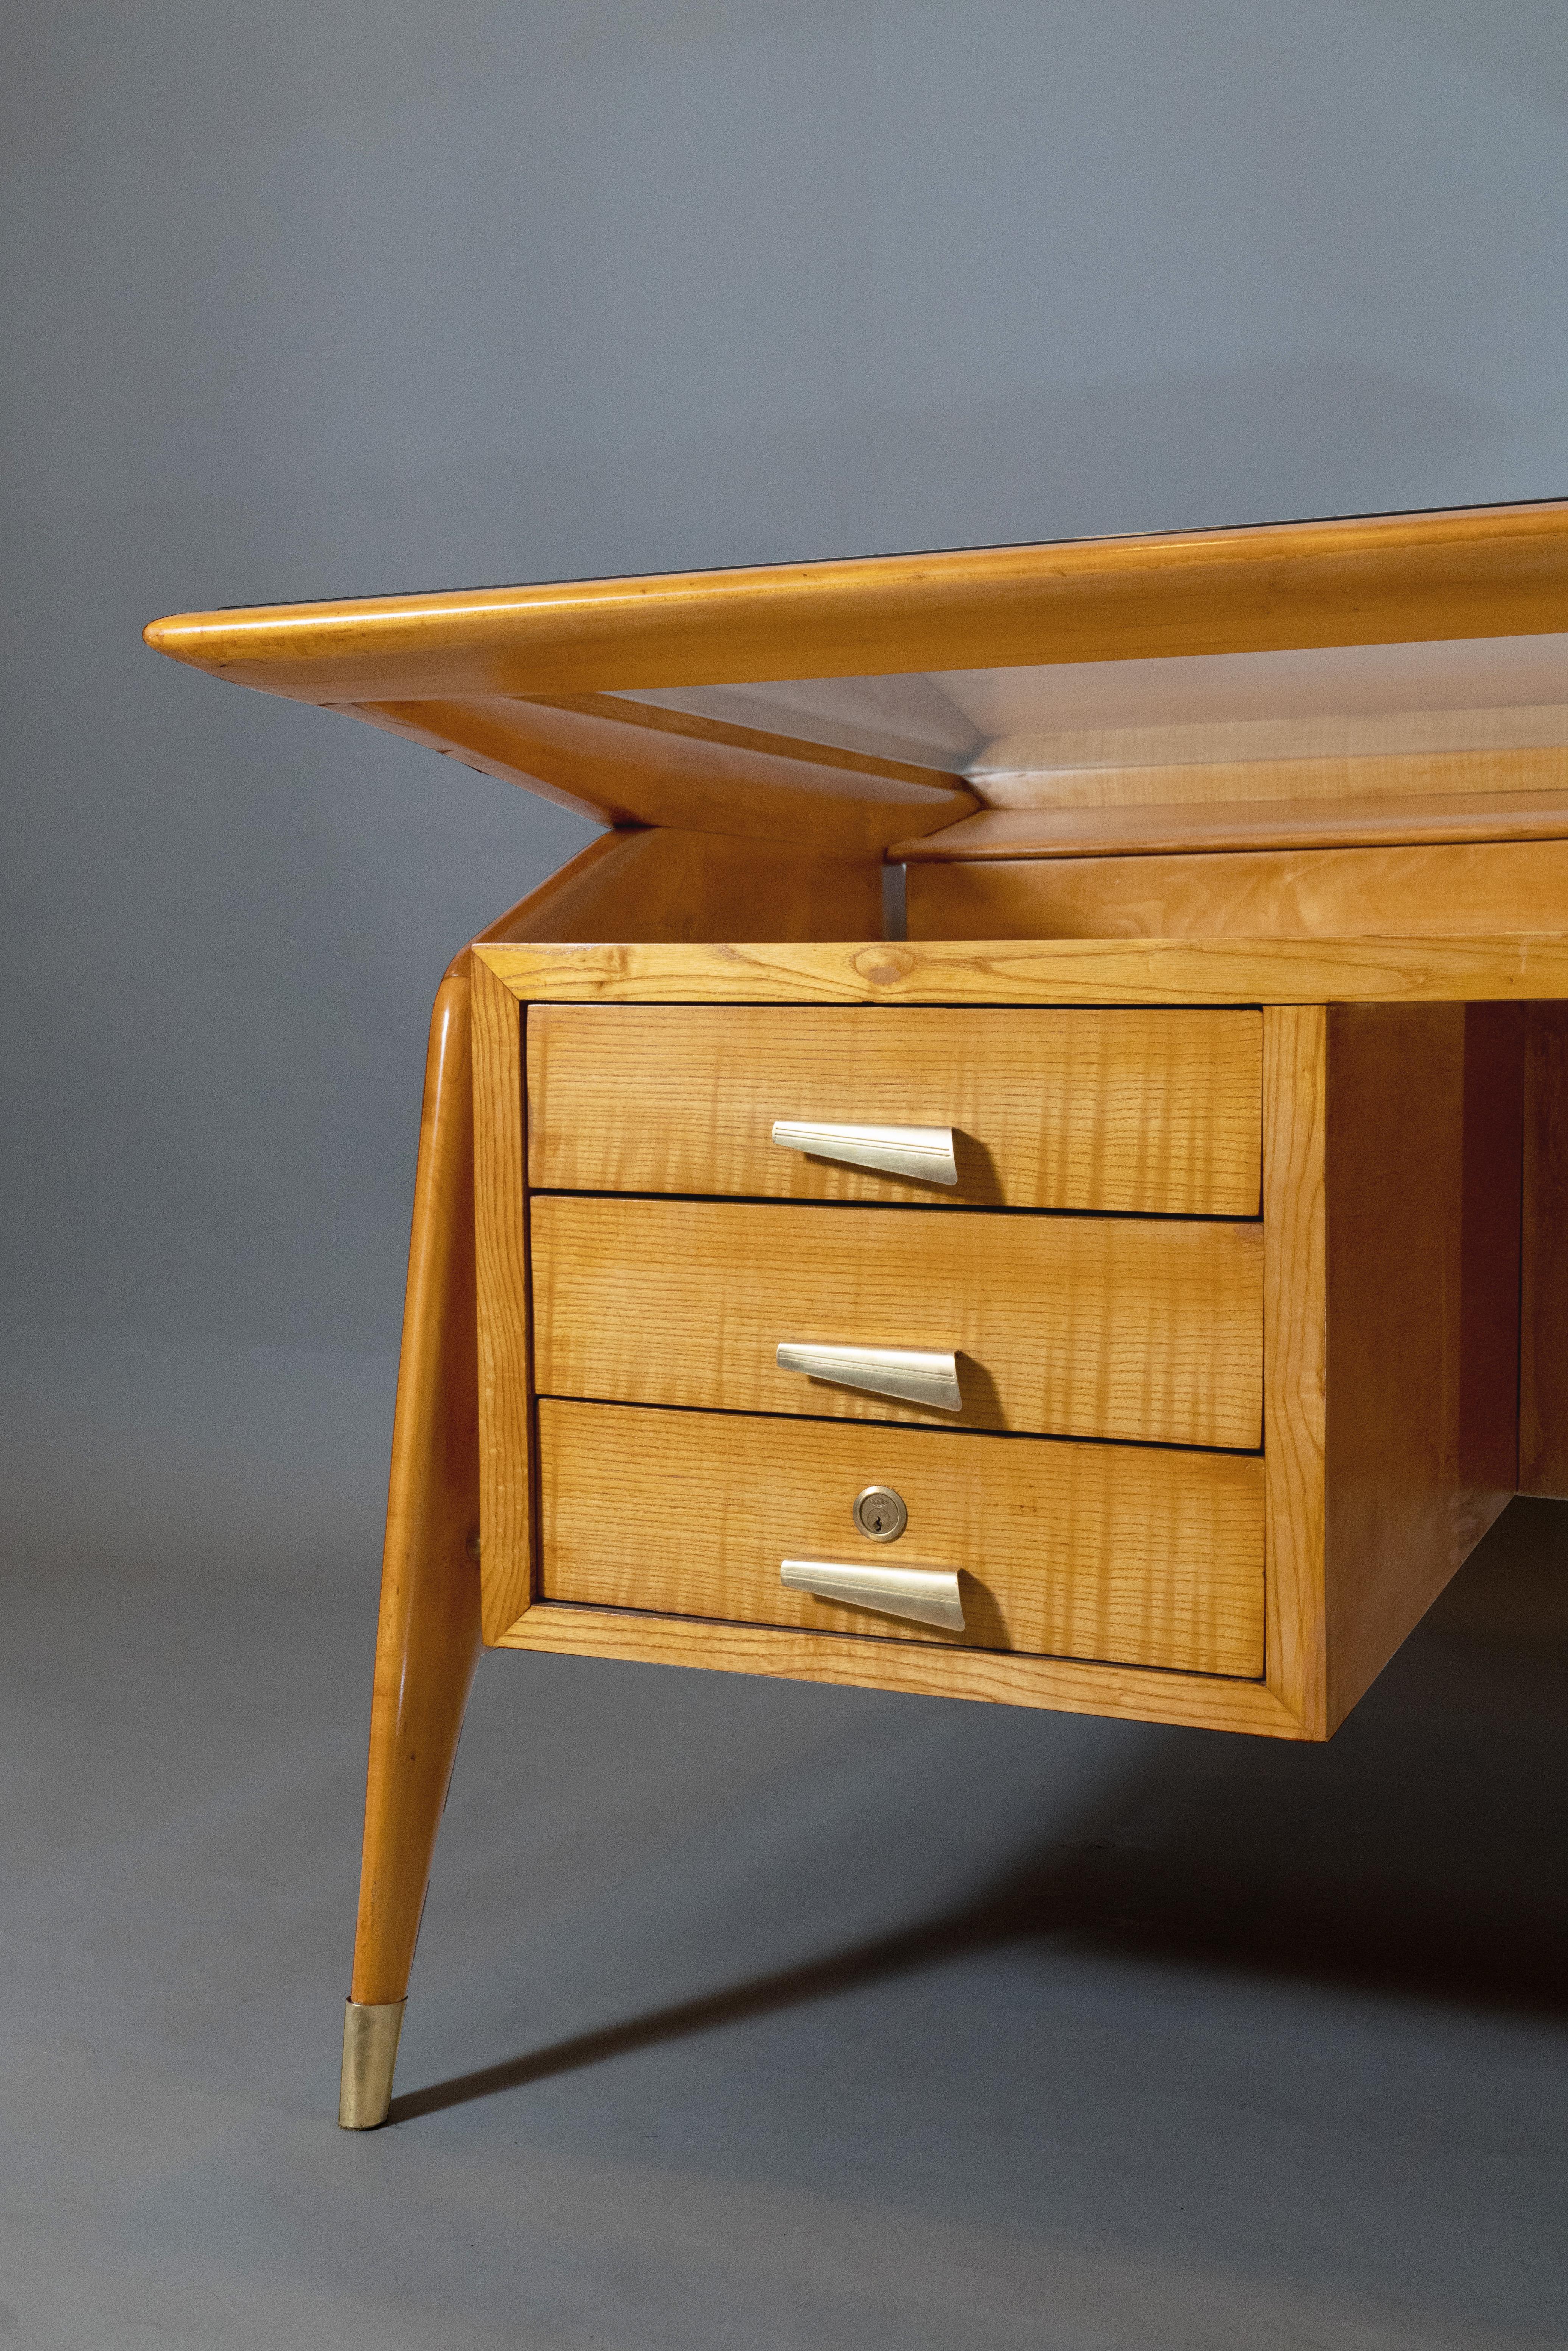 Carlo di Carli: Desk in Fruitwood, Brass, and Glass, Italy 1950s For Sale 3